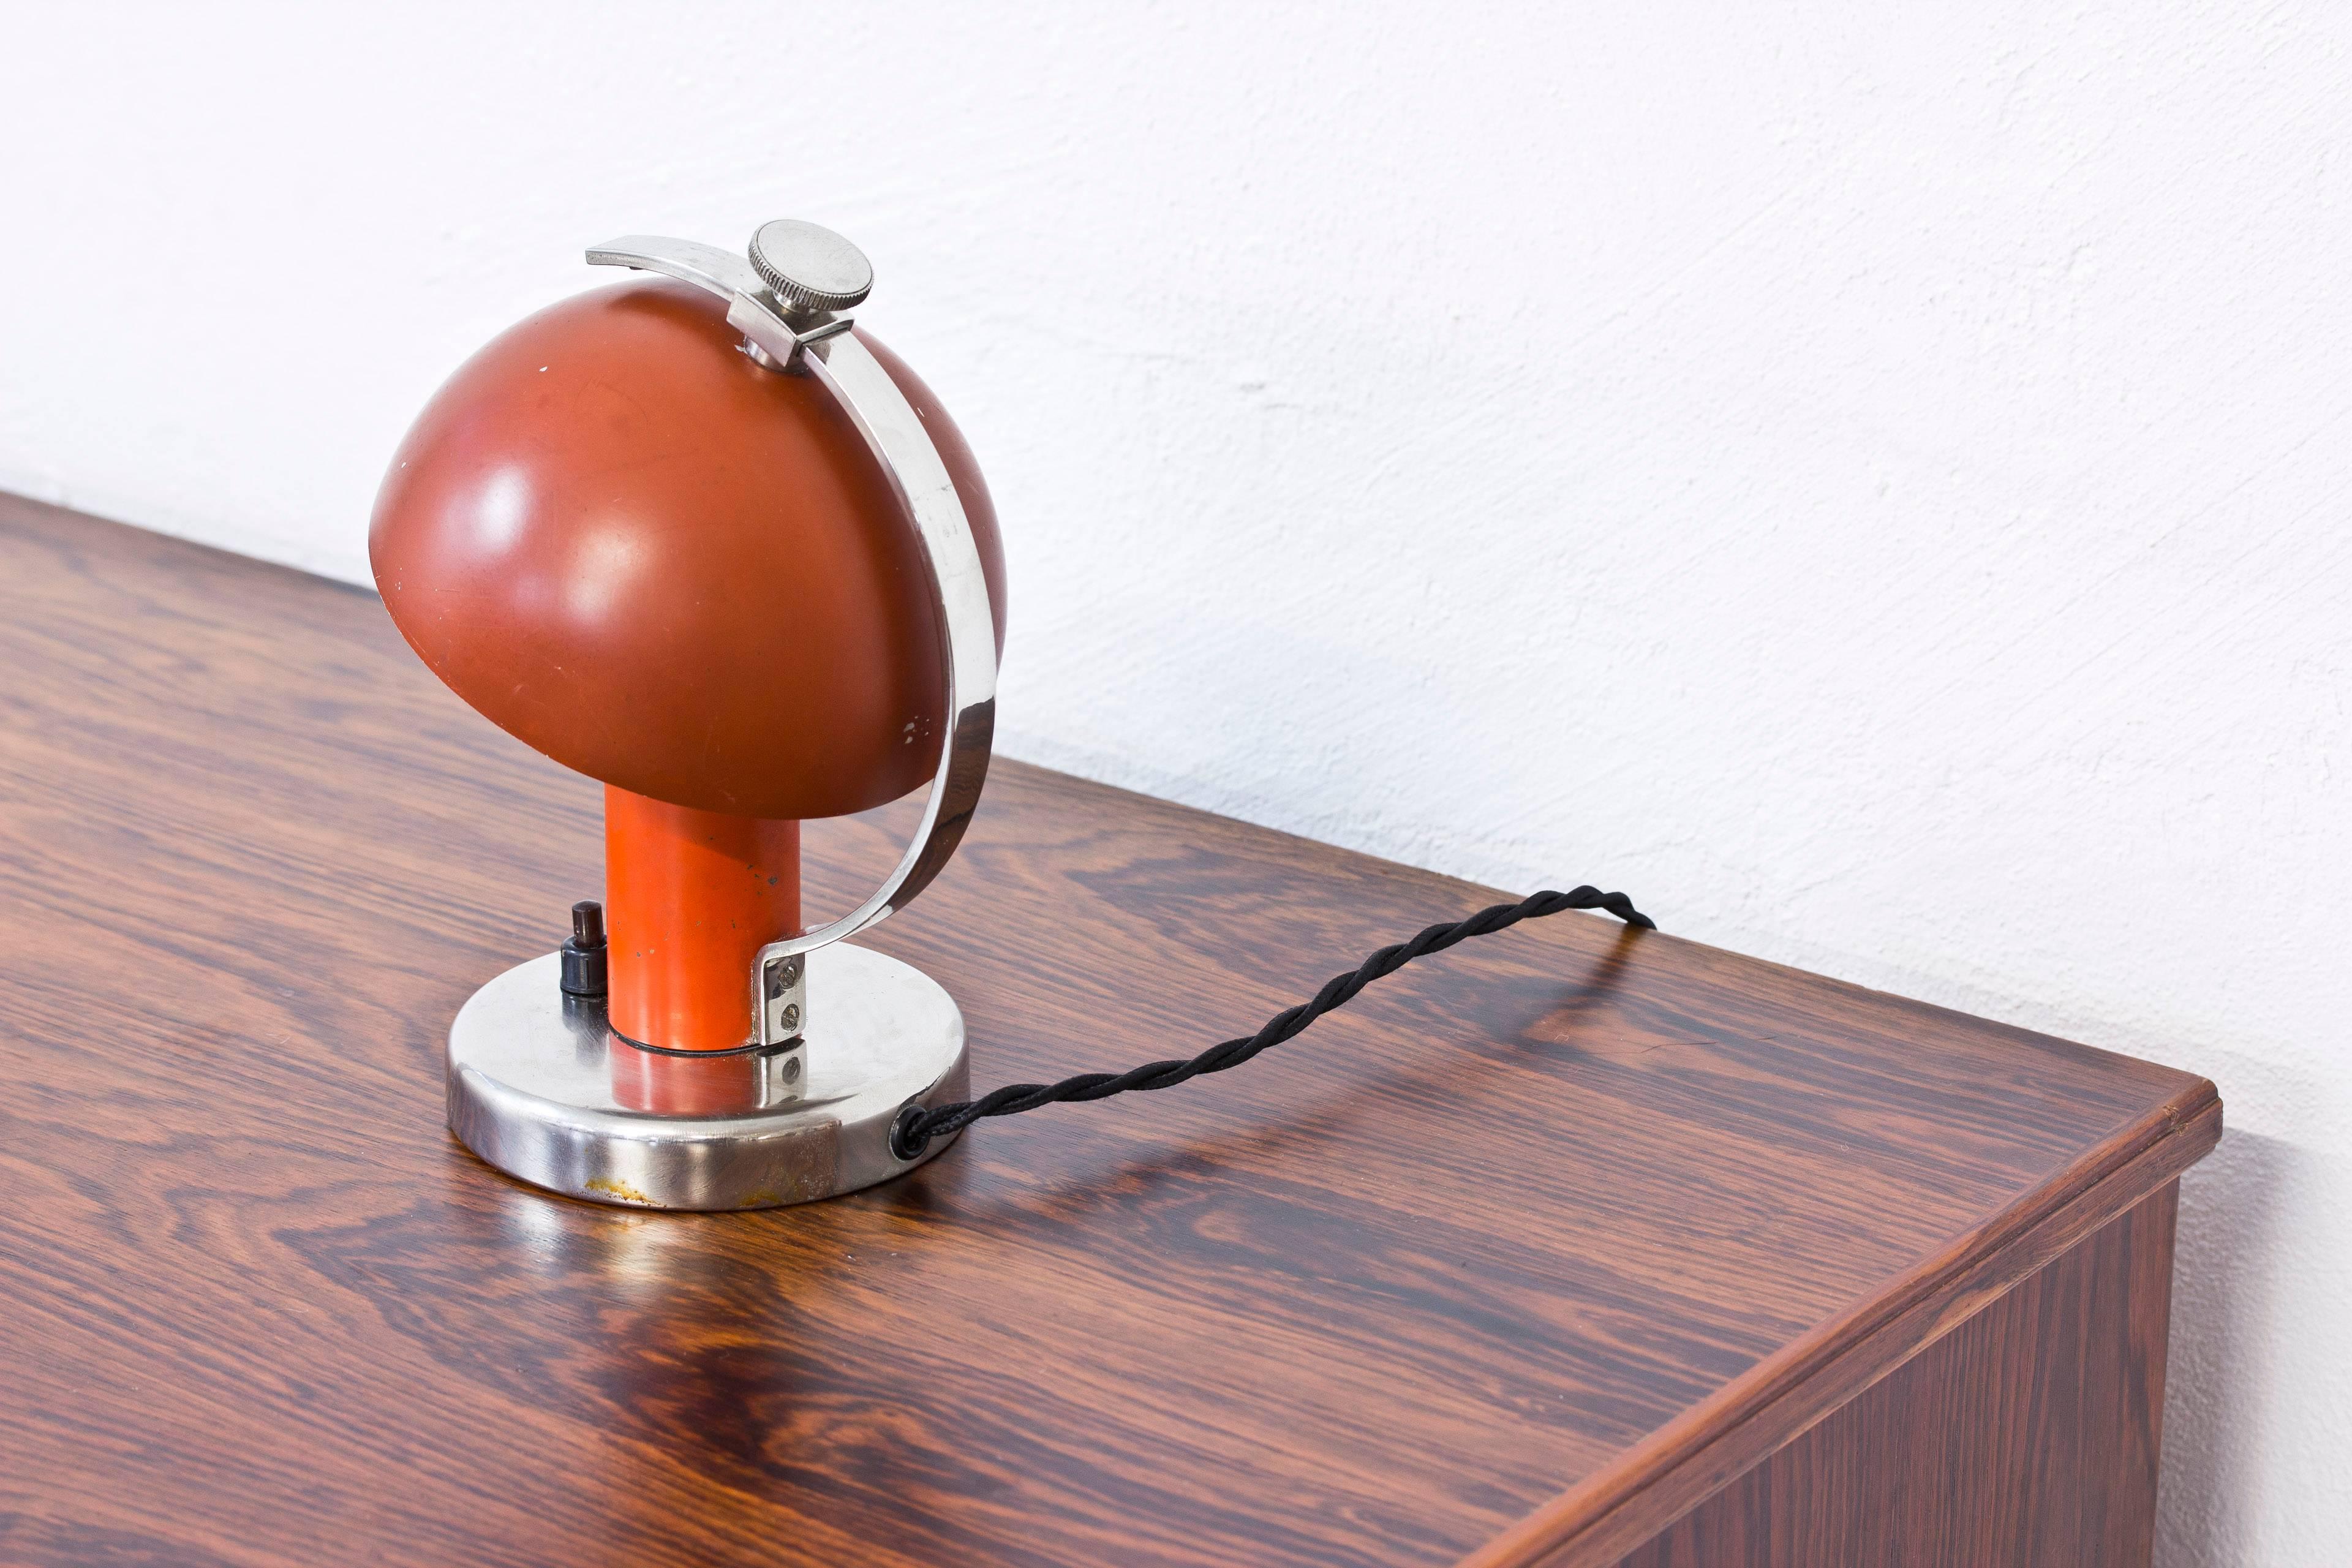 Small functionalist wall or table lamp designed by Erik Tidstrand. Produced in Sweden by Nordiska Kompaniet, NK during the 1930s. Made from nickel-plated metal and lacquered metal in two-tone orange/red. Adjustable shade for varying the light after